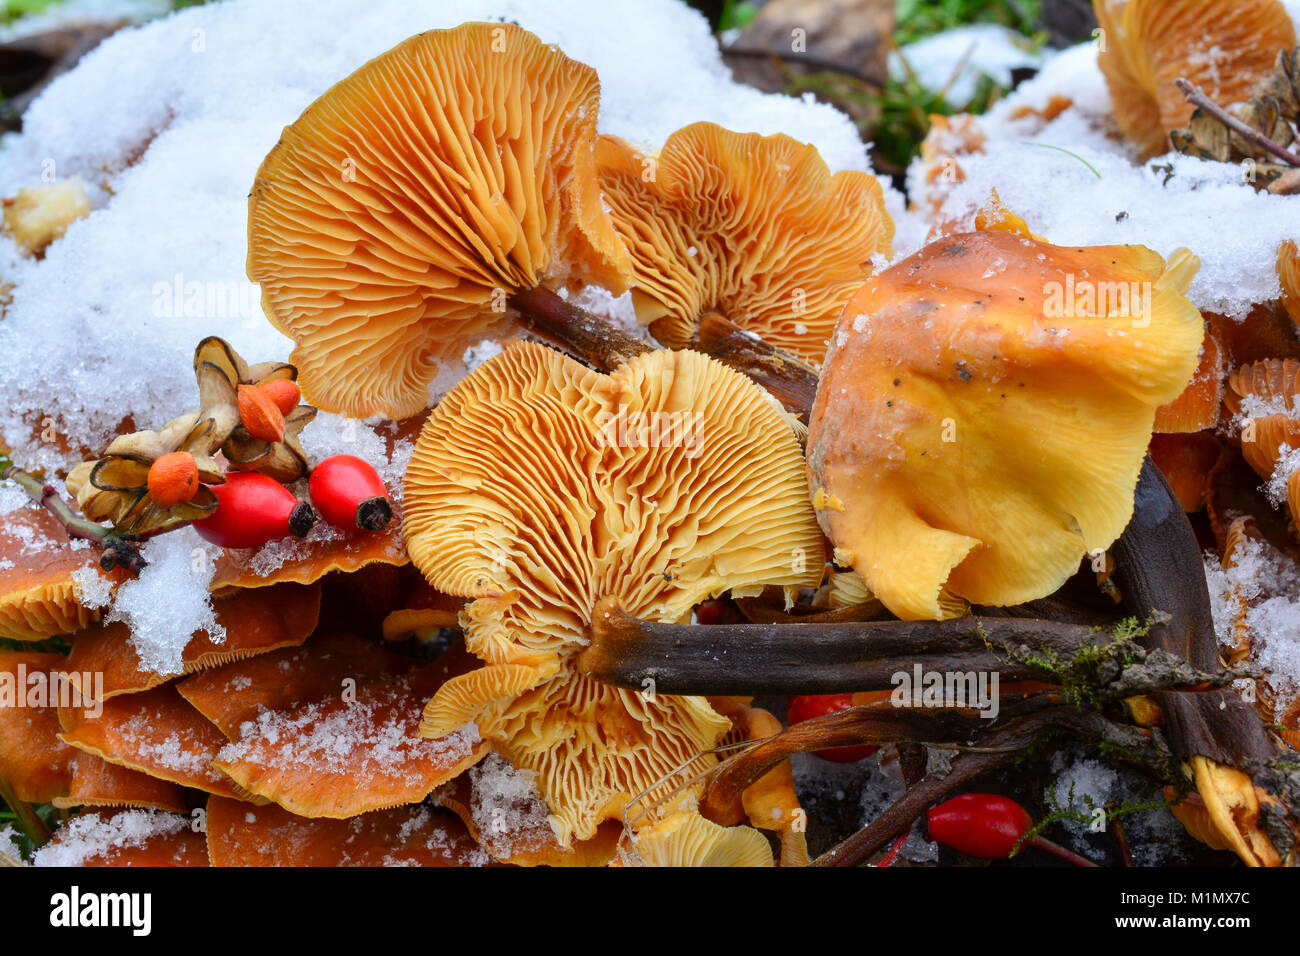 Cluster of Flammulina velutipes or Velvet Shank mushrooms in snow, decorated with some red seeds, edible sort of mushrooms growing in winter time, clo Stock Photo